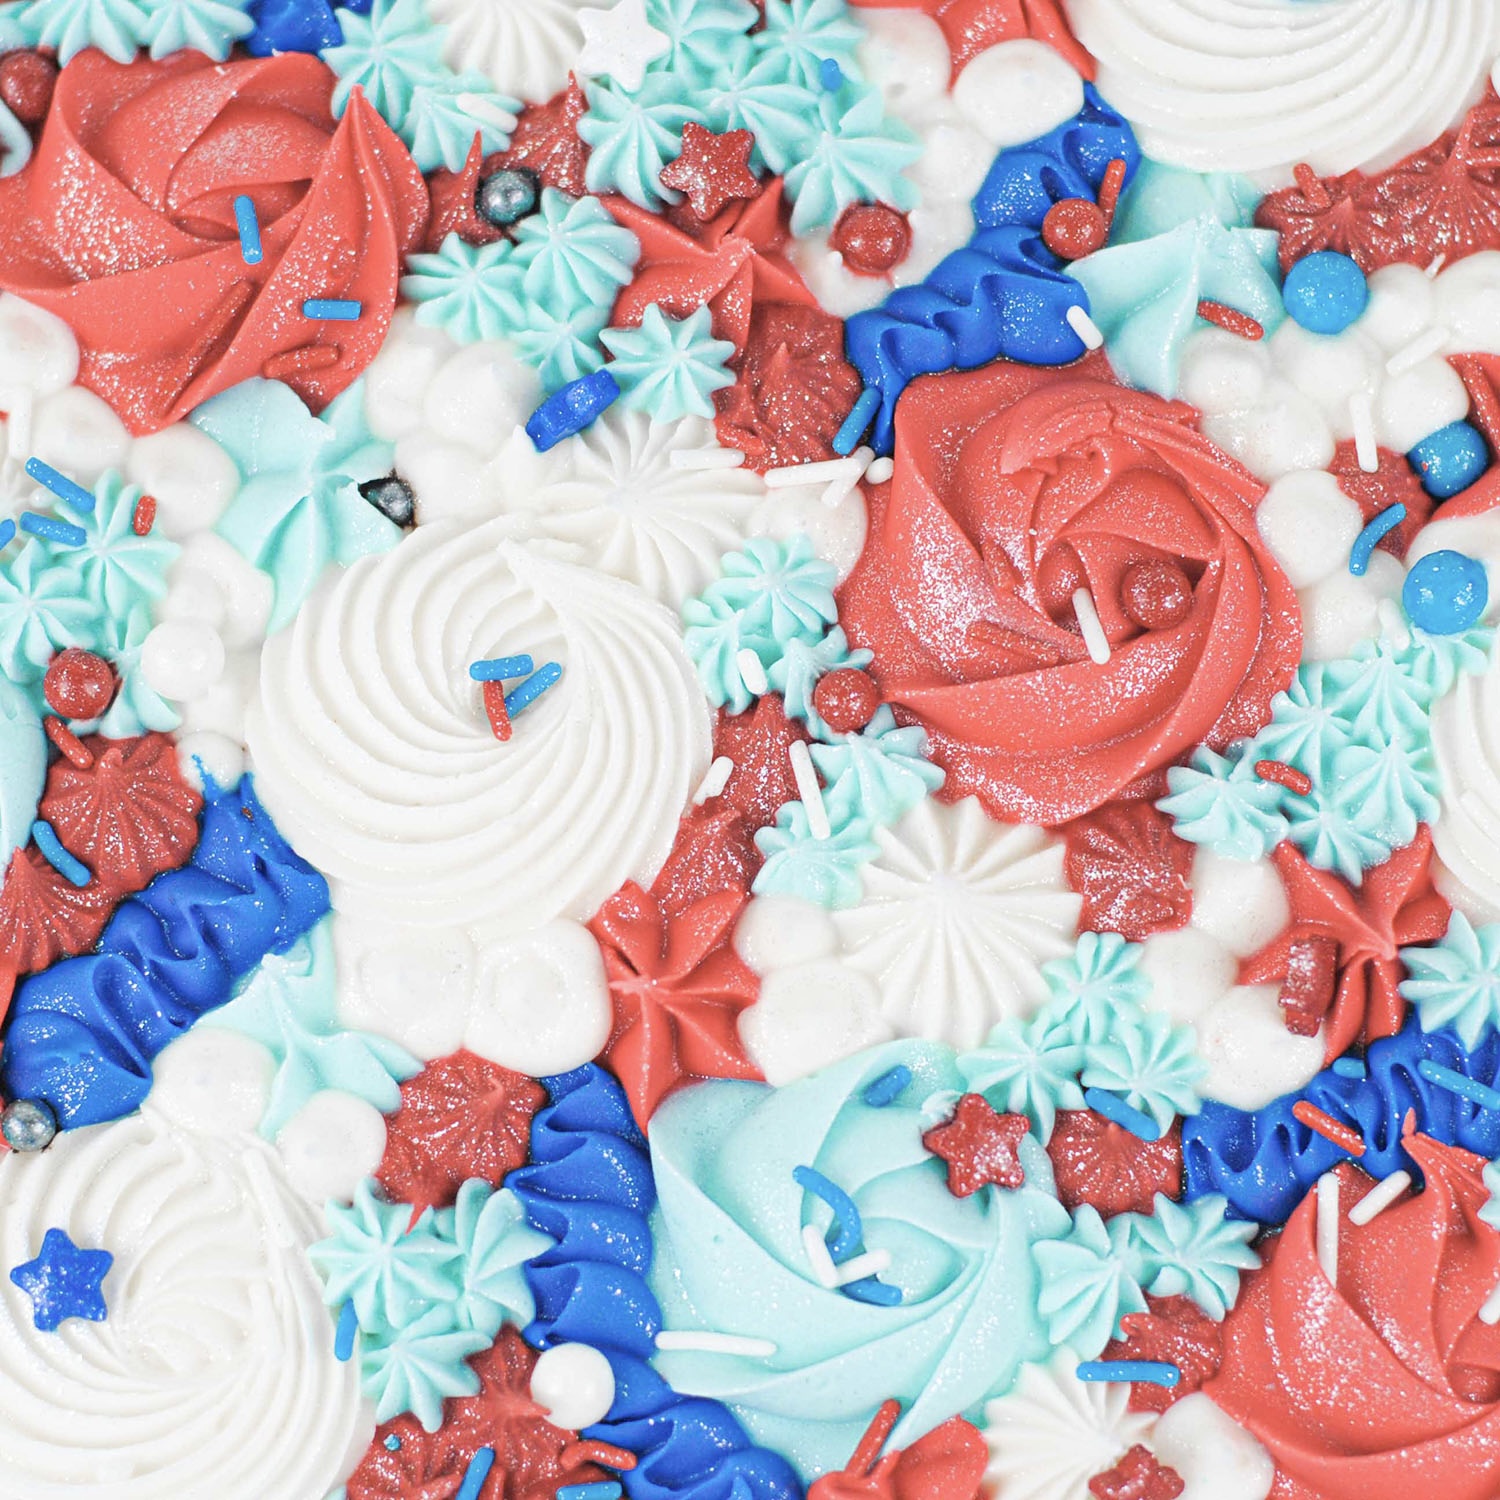 Large white and red buttercream rosettes, light blue and blue star dollops and ribbons in blue and white buttercream with star, pearl and jimmie sprinkles and jewel dust fo sparkle.